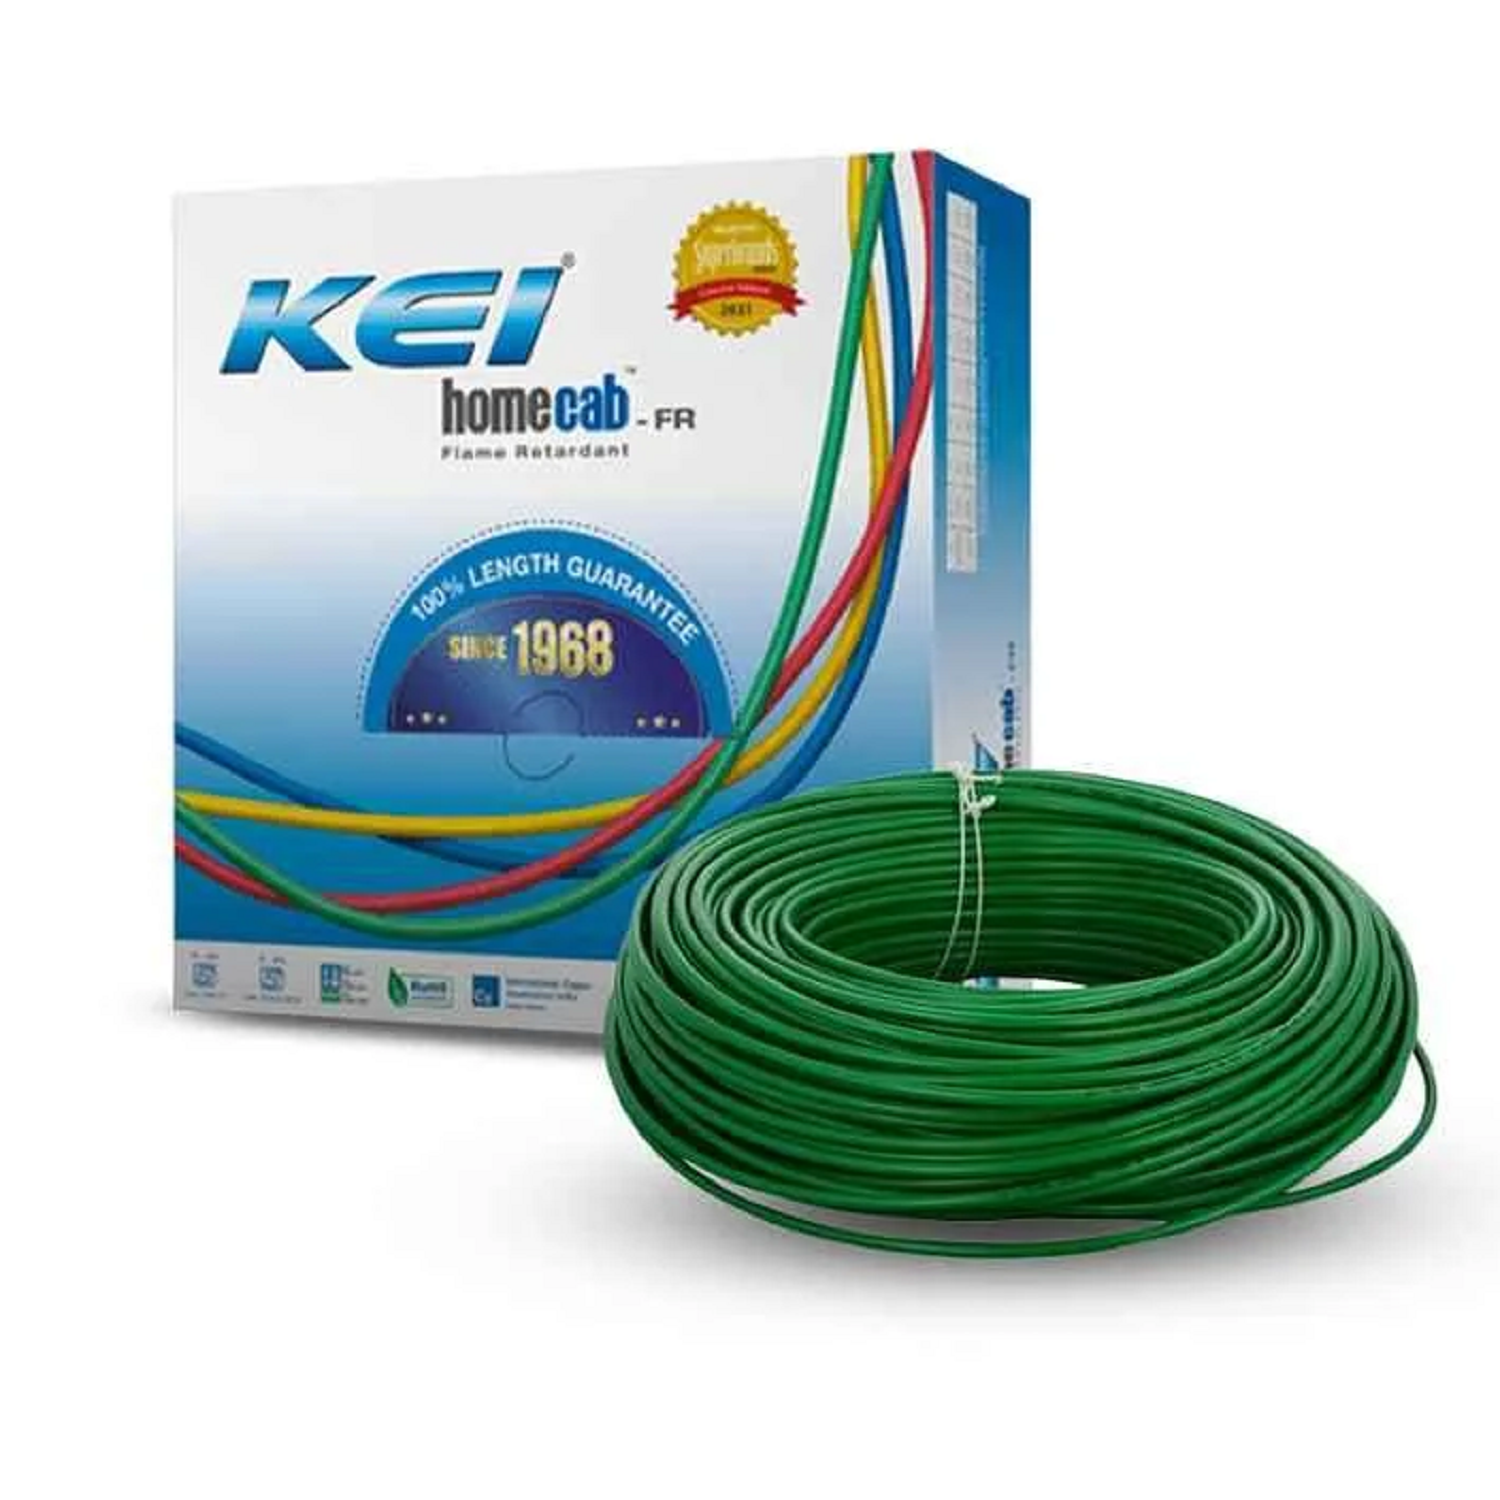 0.75 Sqmm KEI FR Single Core Copper Wire 90 MTR With PVC Insulated for House 38 Industrial (Green)